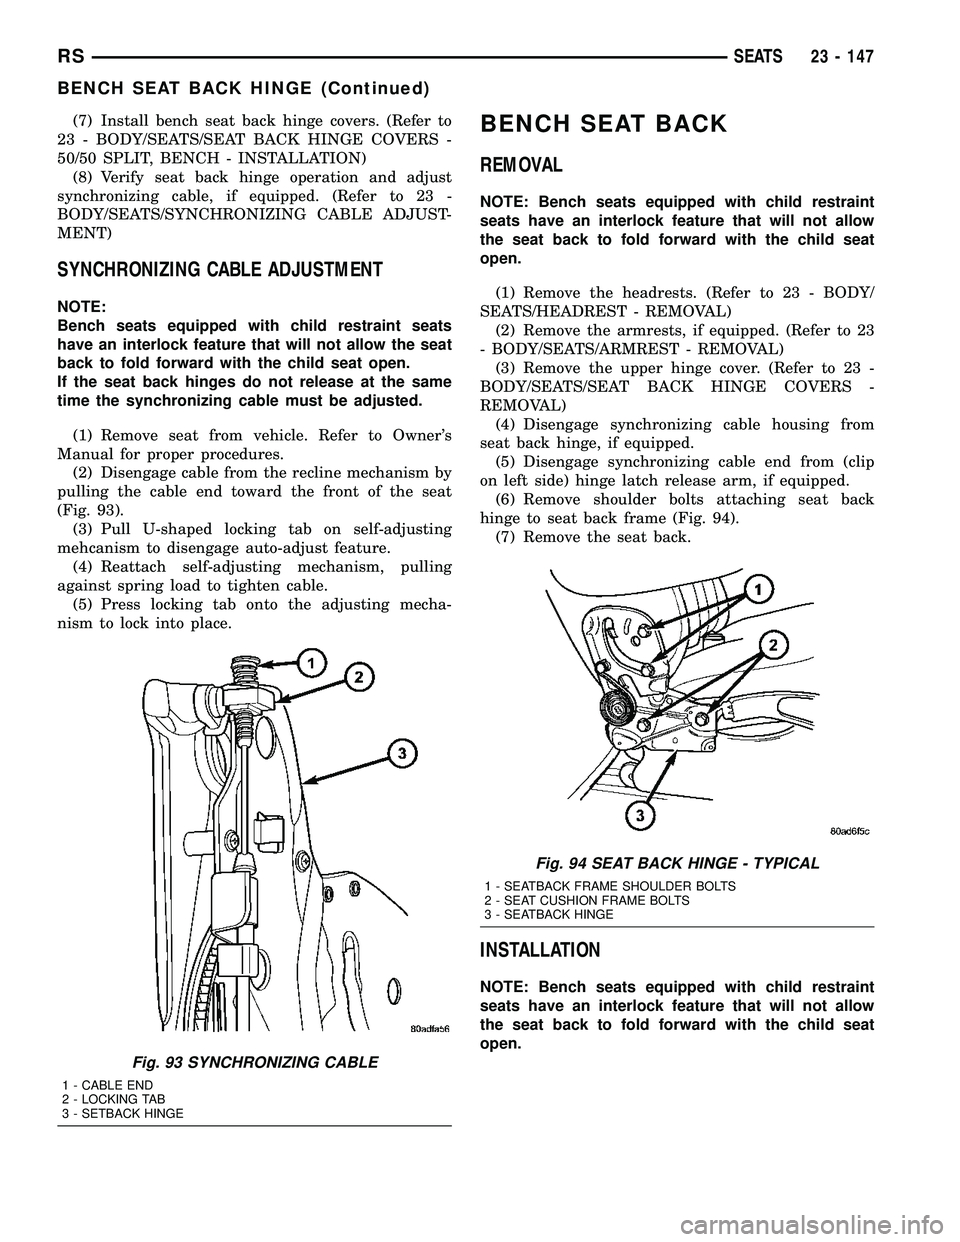 CHRYSLER VOYAGER 2005 User Guide (7) Install bench seat back hinge covers. (Refer to
23 - BODY/SEATS/SEAT BACK HINGE COVERS -
50/50 SPLIT, BENCH - INSTALLATION)
(8) Verify seat back hinge operation and adjust
synchronizing cable, if 